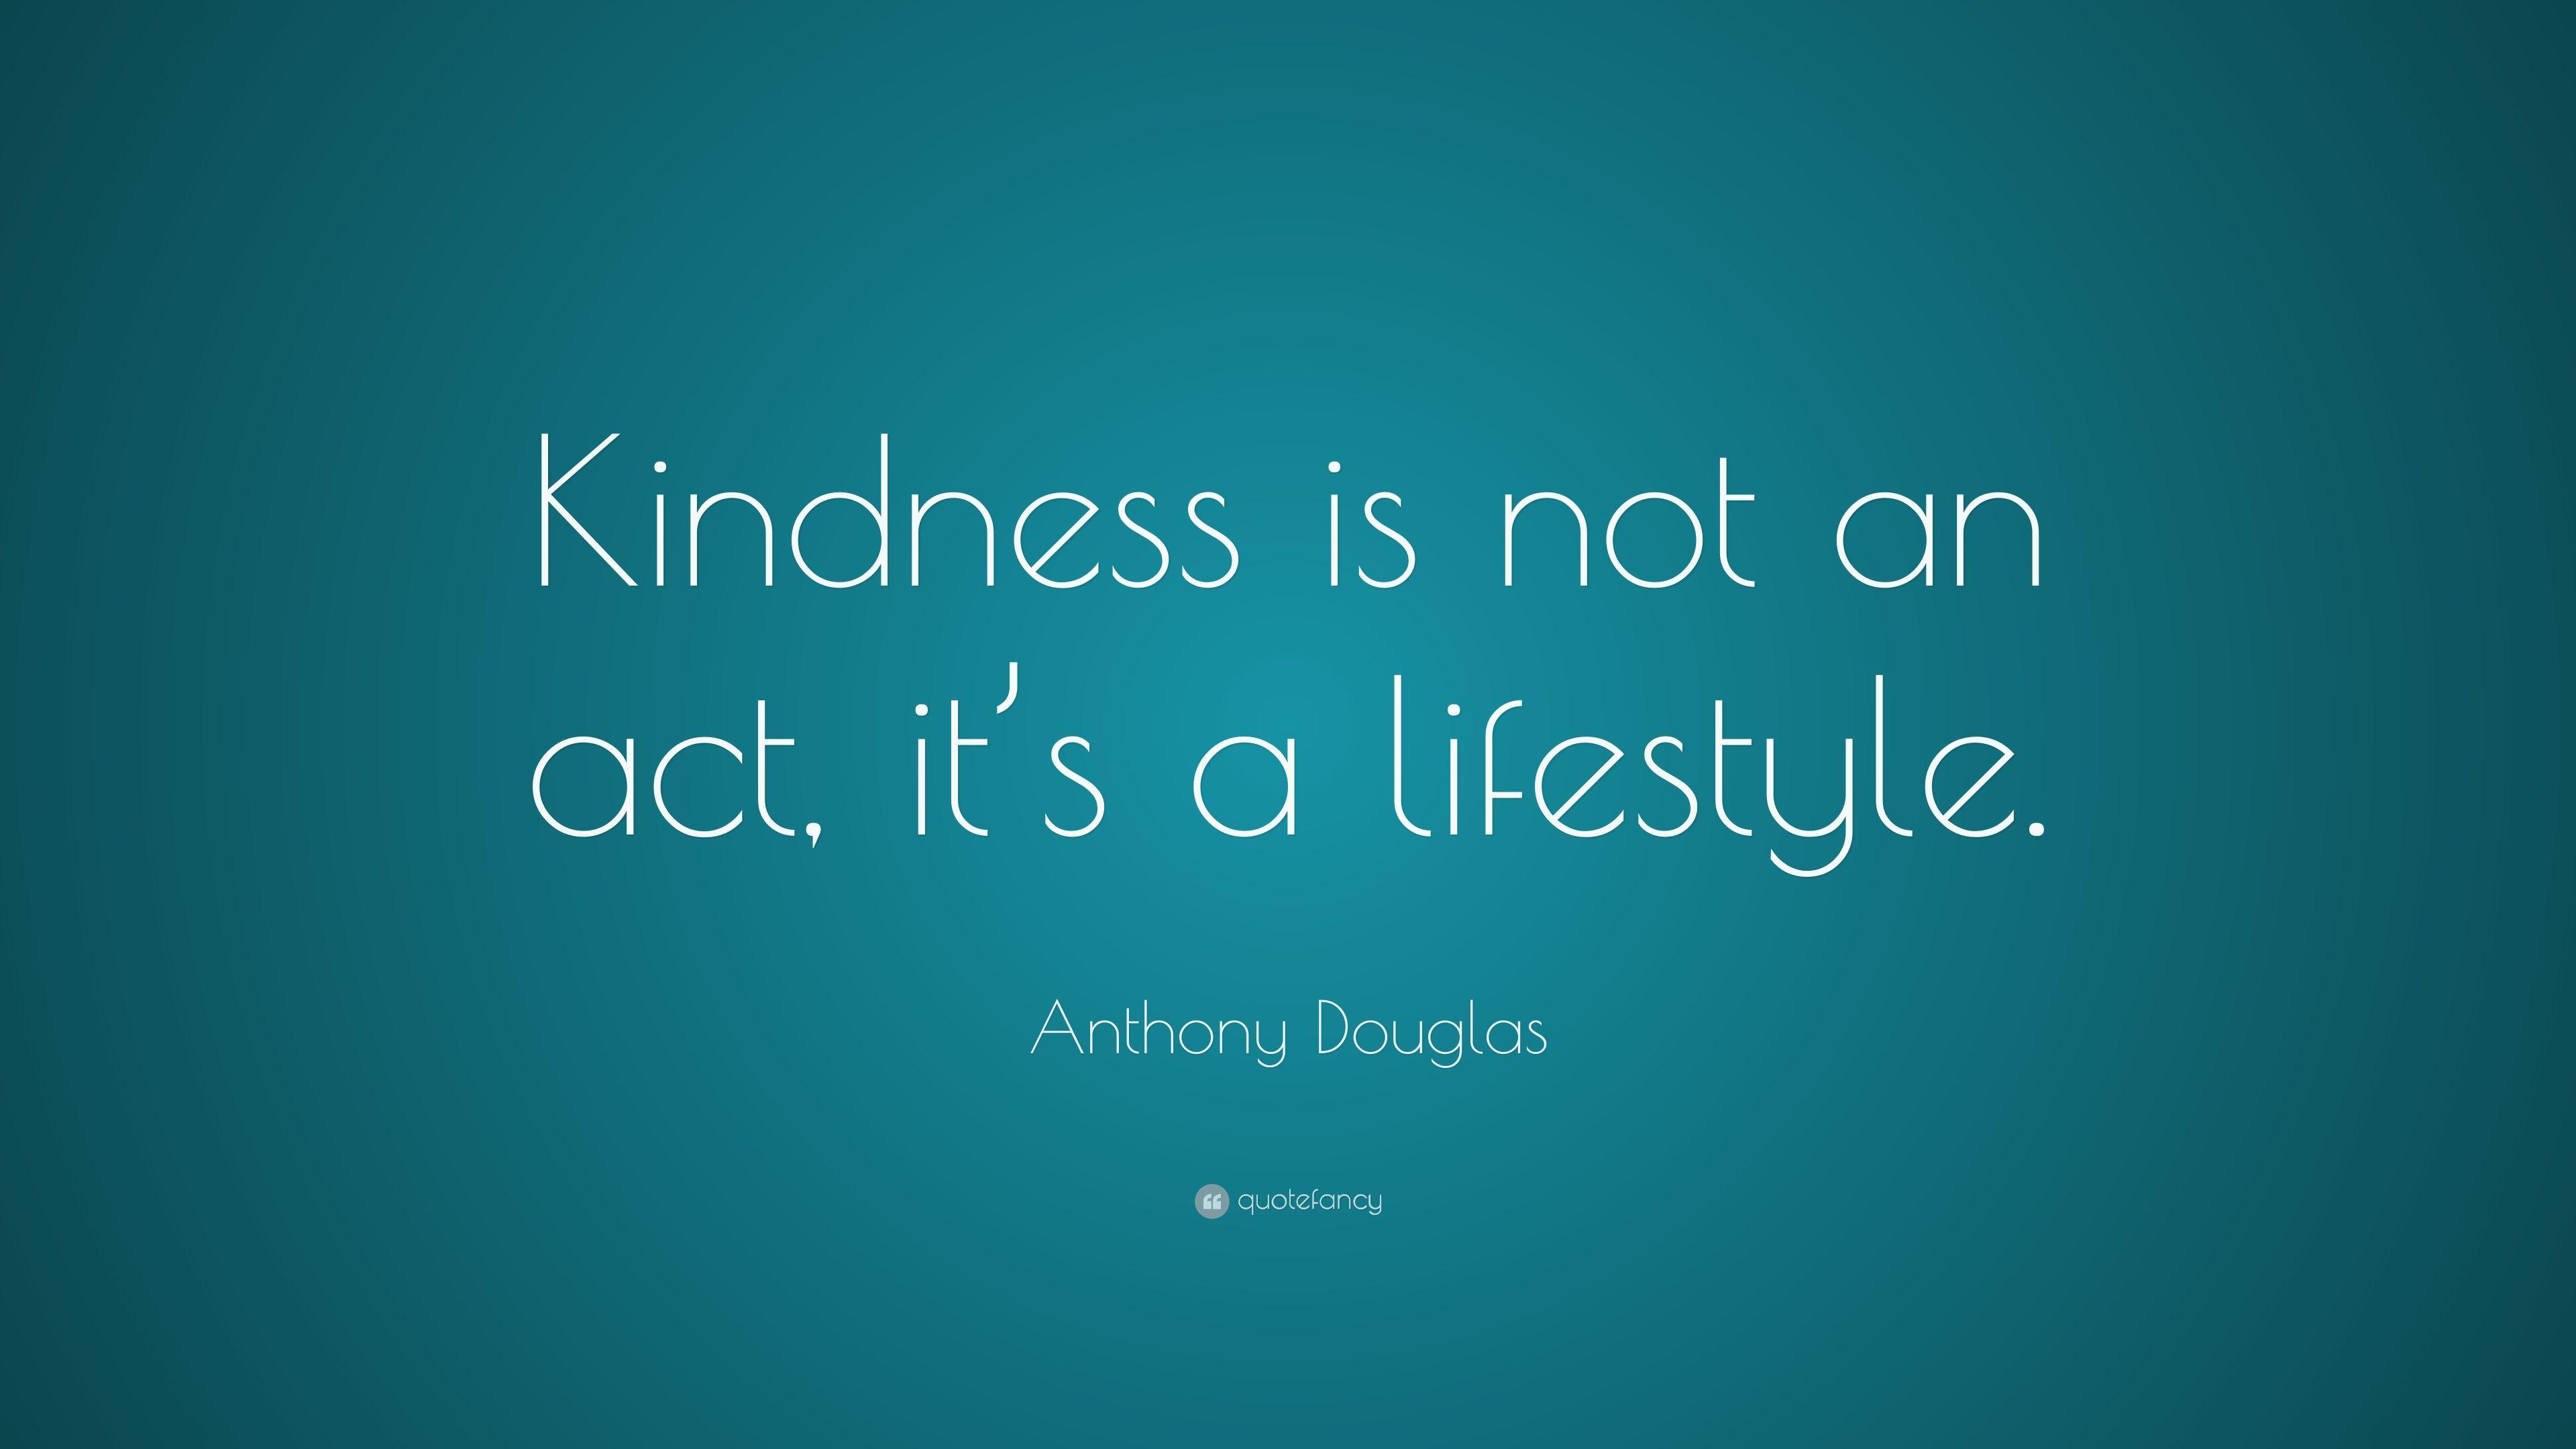 Anthony Douglas Quote: “Kindness is not an act, it's a lifestyle